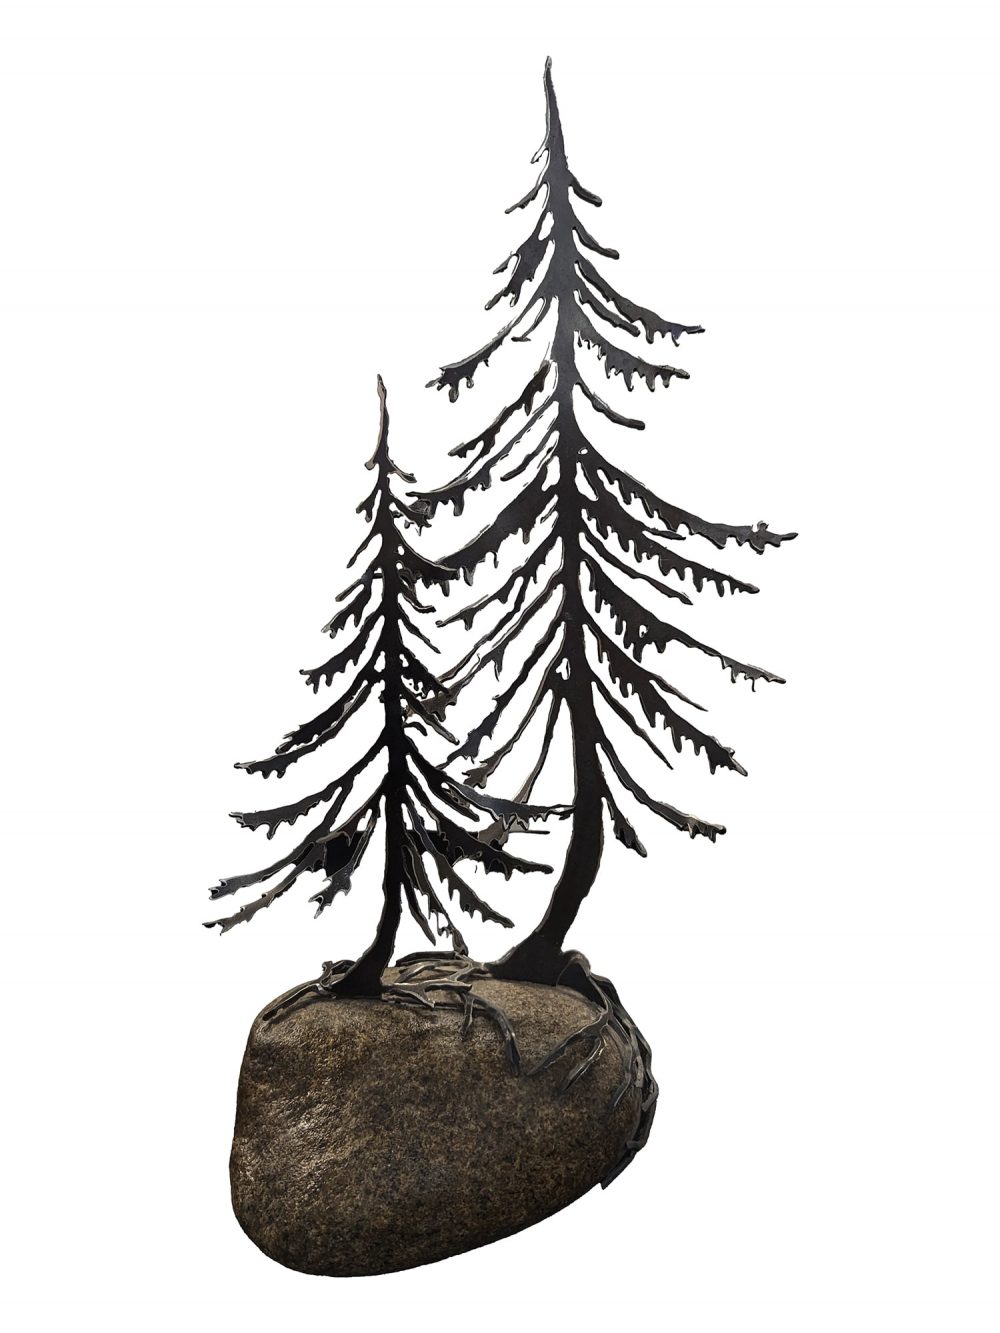 Jackpines (two) On Stone by Cathy Mark